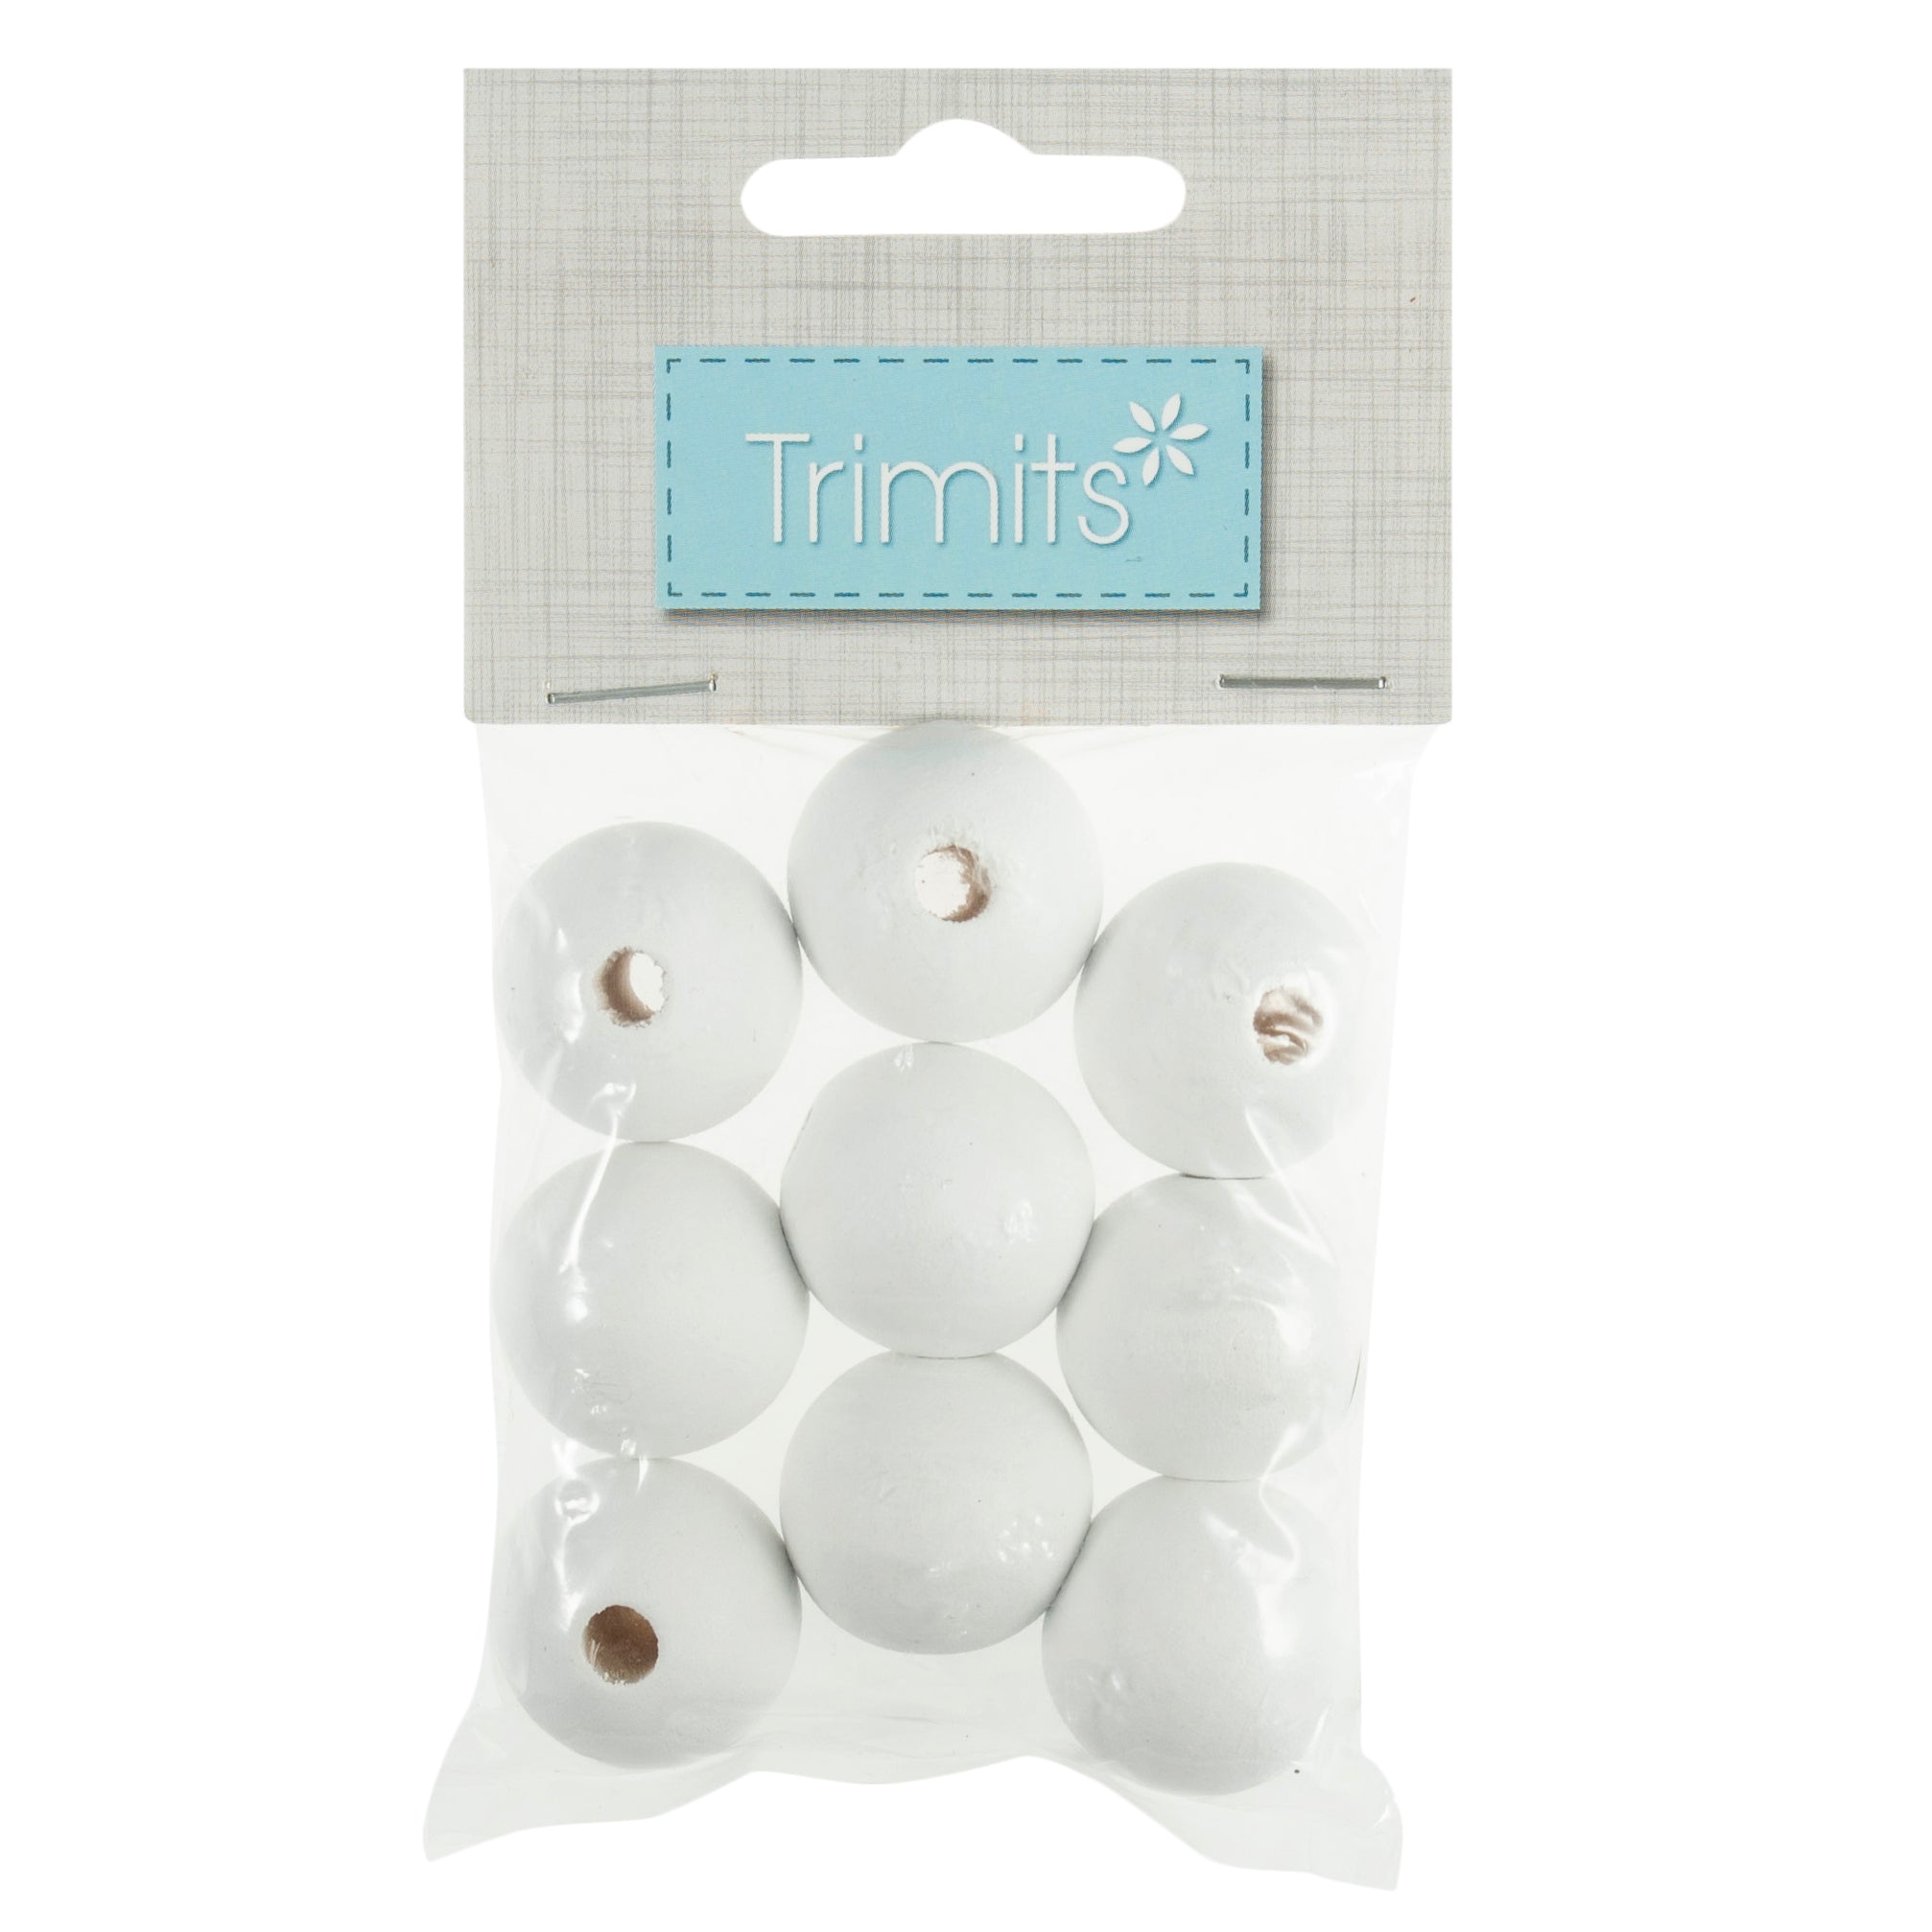 Wooden Craft Beads 25mm white